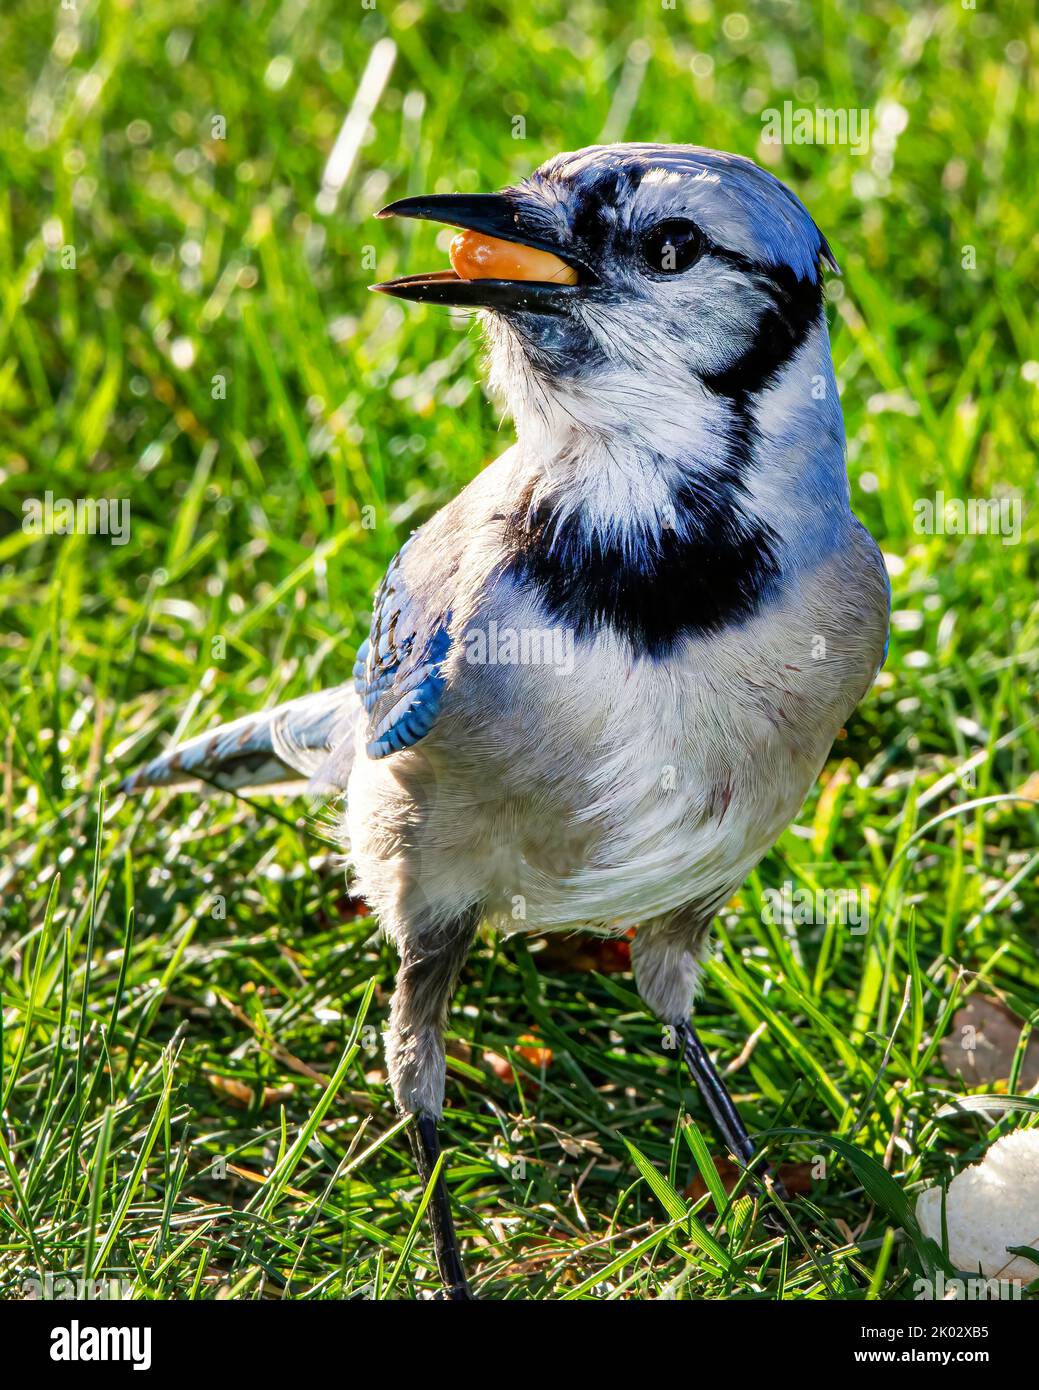 A closeup of adorable blue jay on green grass with eating peanut Stock Photo